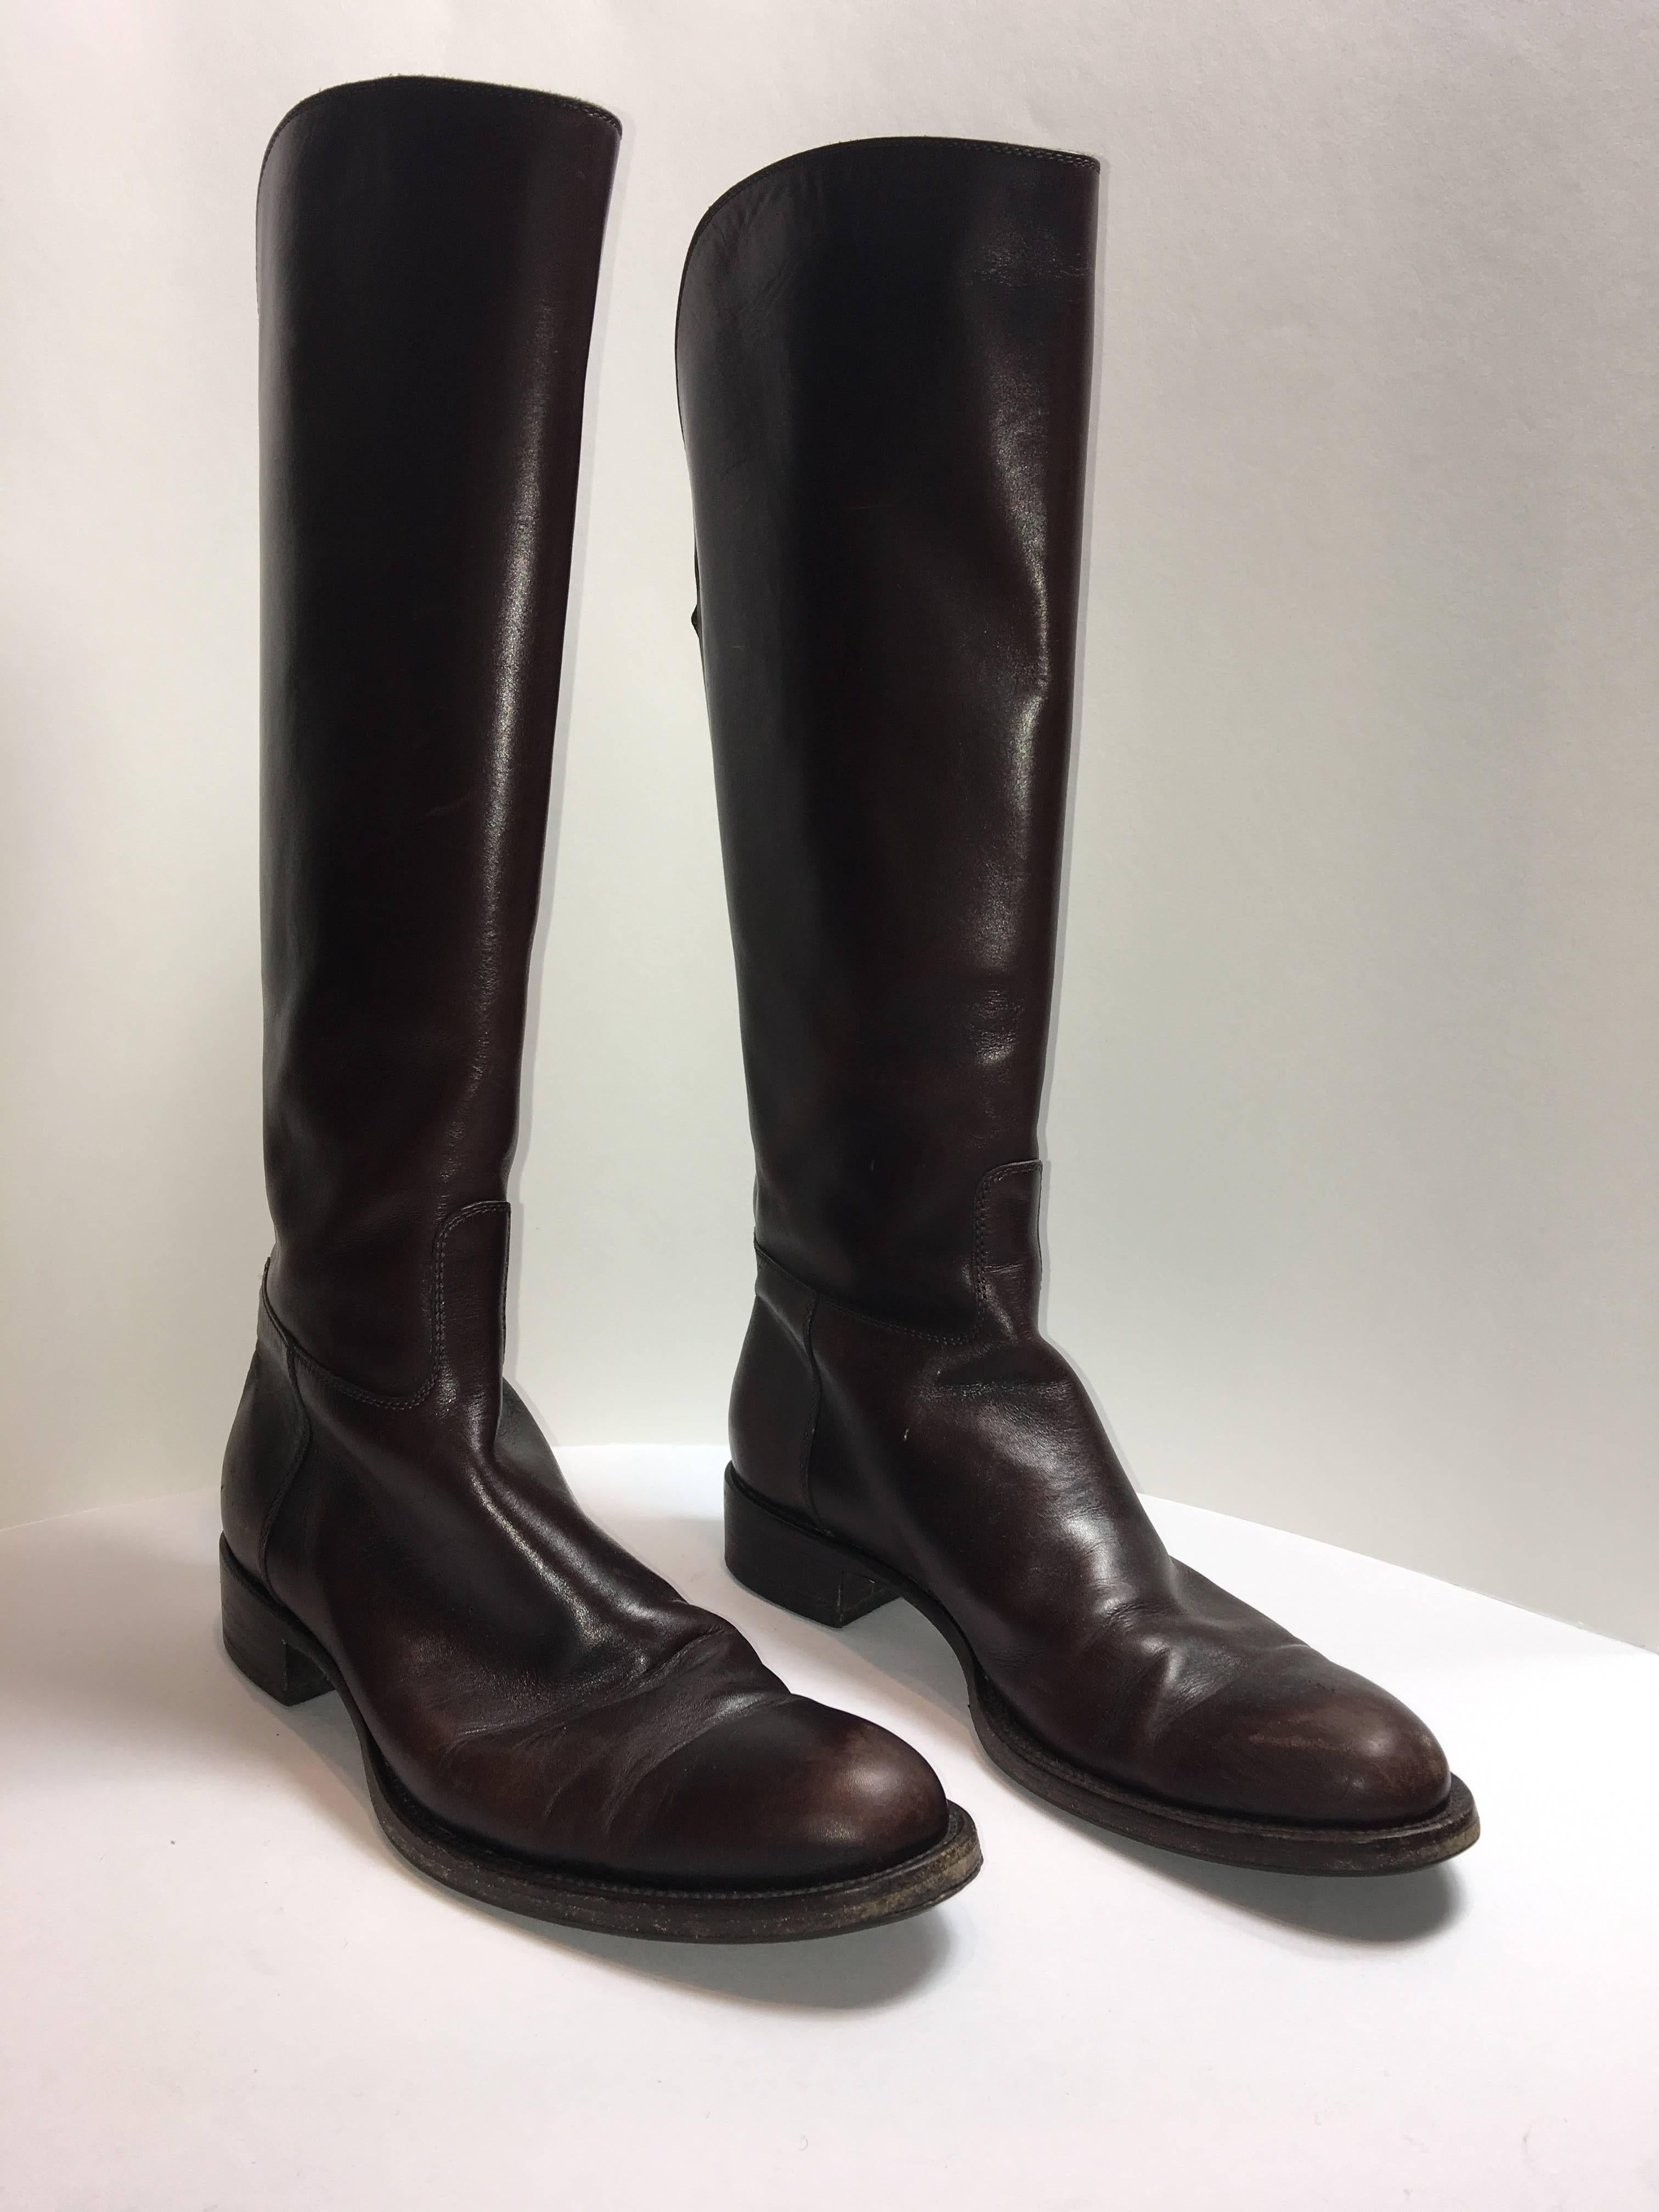 Loro Piana size 40.5 Boots in brown leather. Riding boot style with back zipper and rounded toe. 